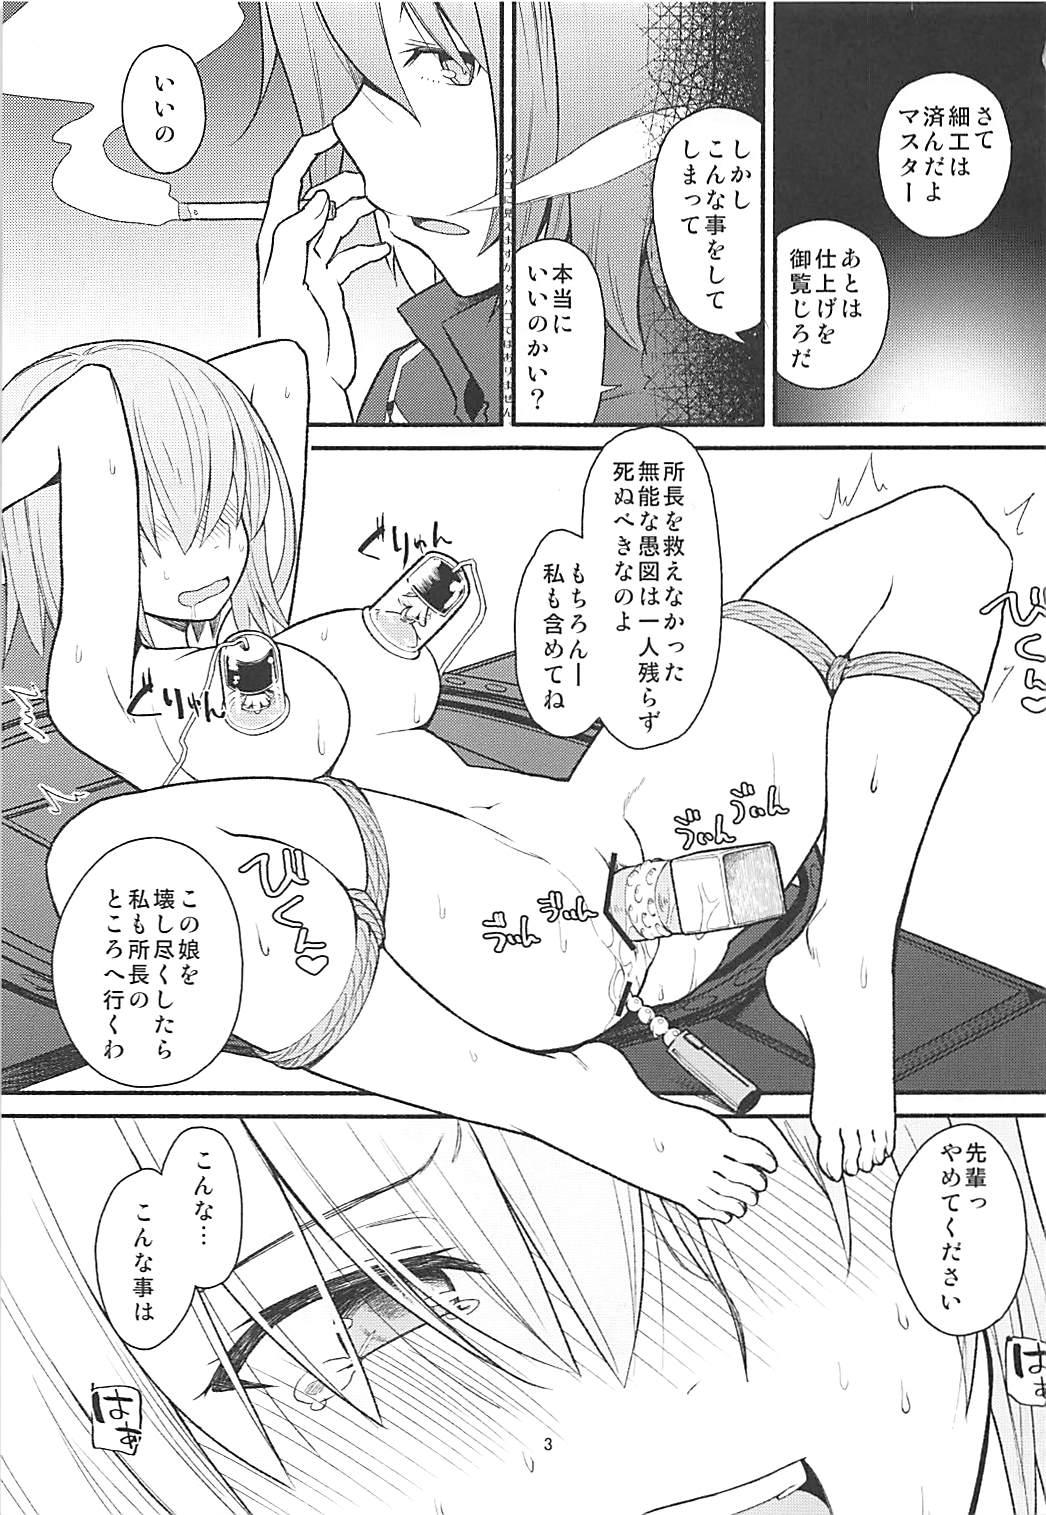 Celebrity Tsumeawase - Fate grand order Stepfather - Page 2